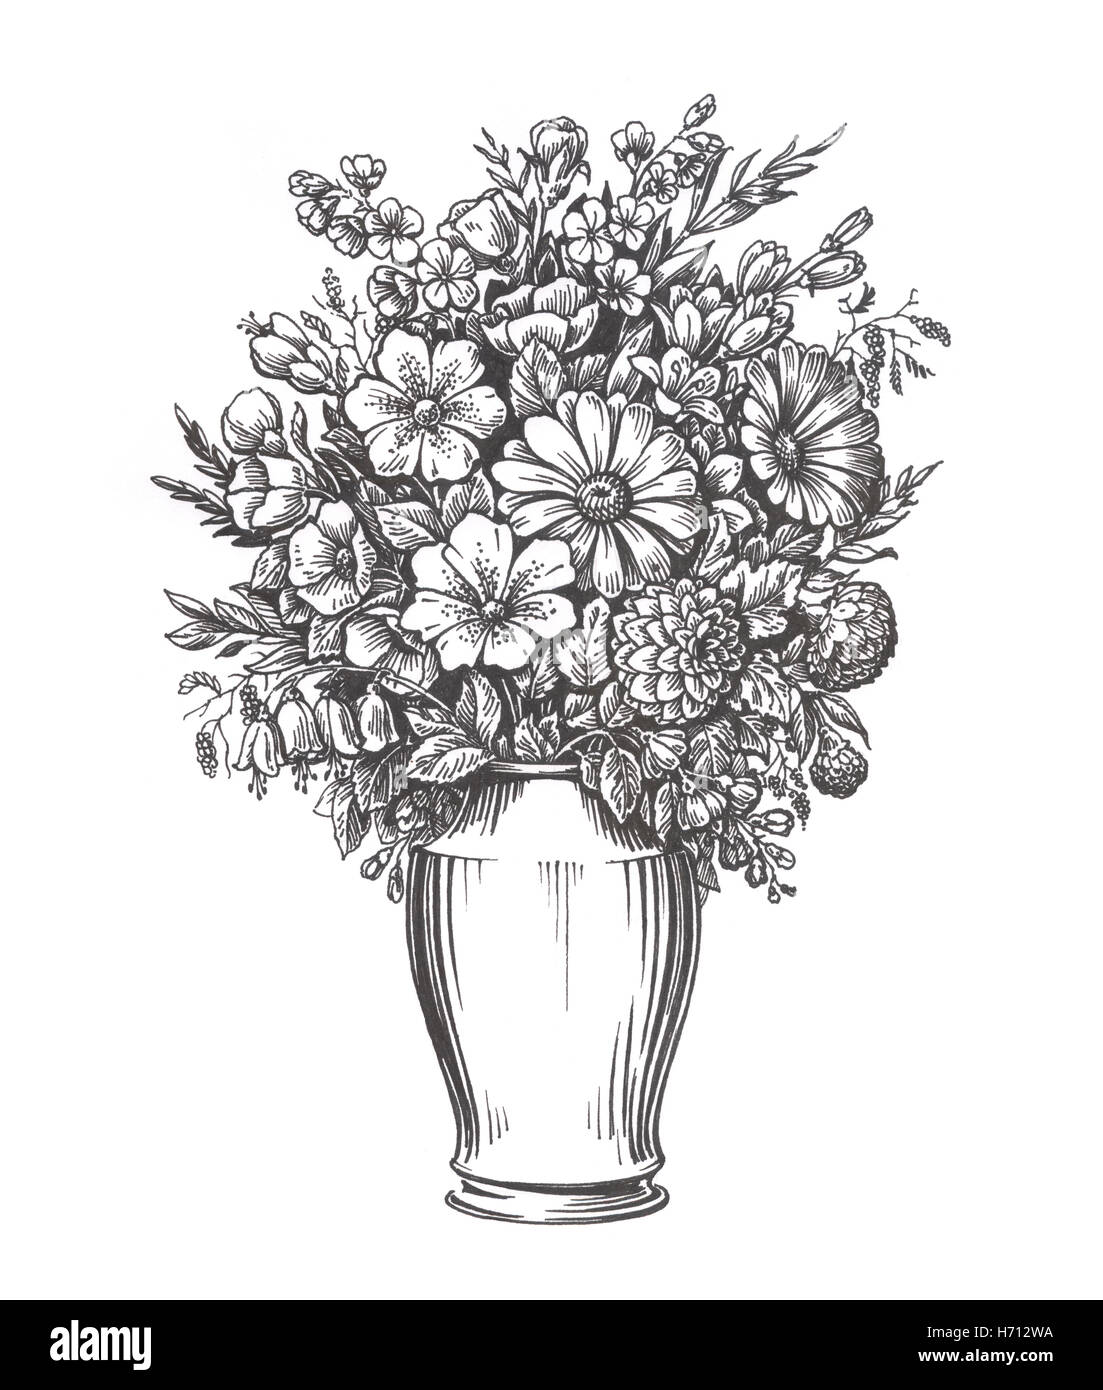 Vintage vase with flowers. Hand drawn sketch illustration Stock Photo